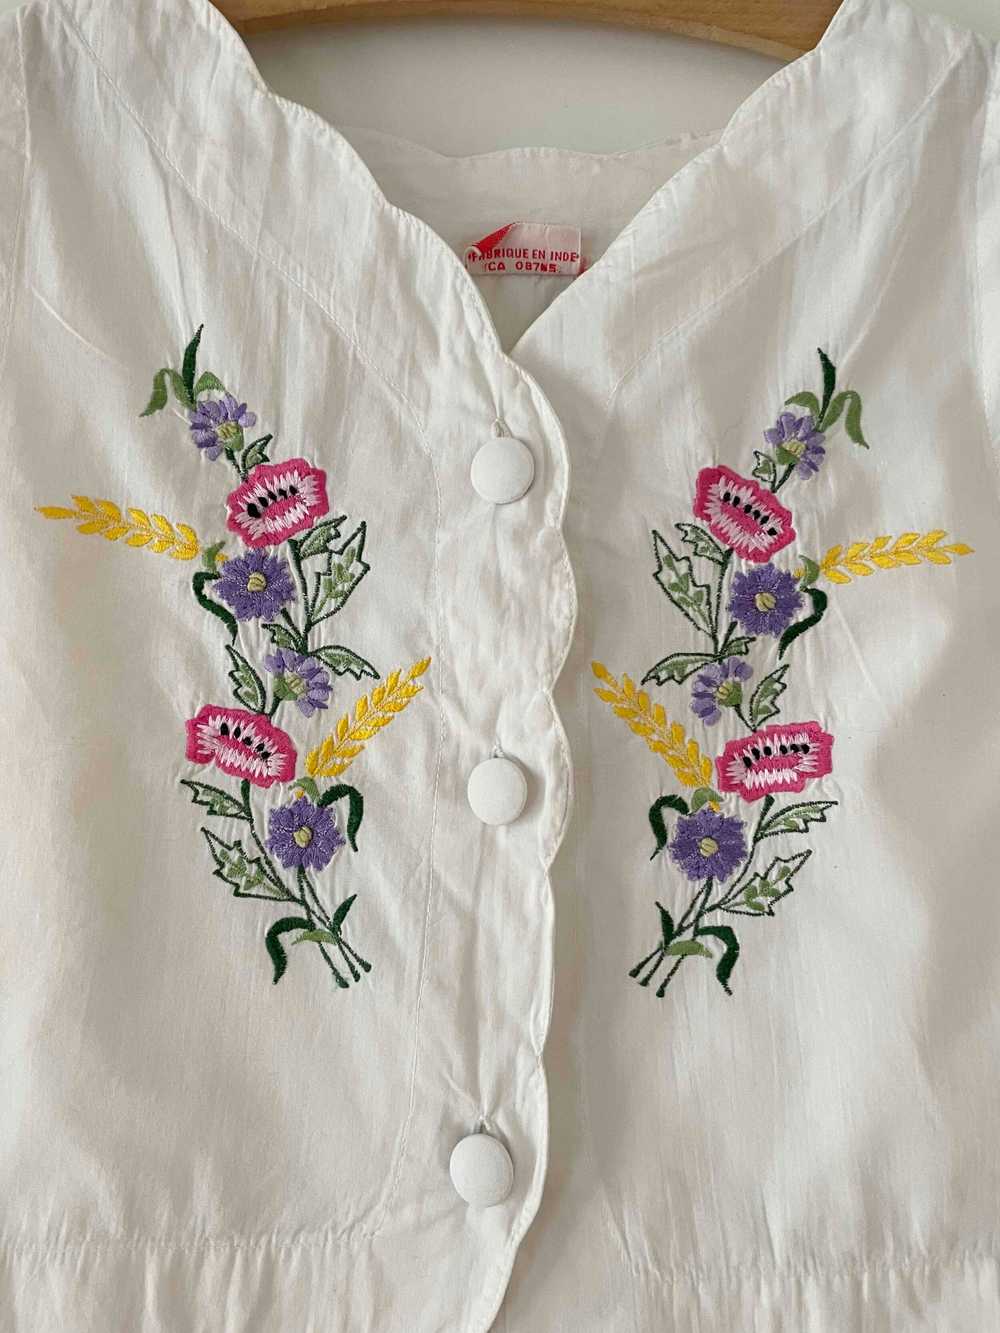 Cotton top - Top embroidered flowers Tank top / C… - image 3